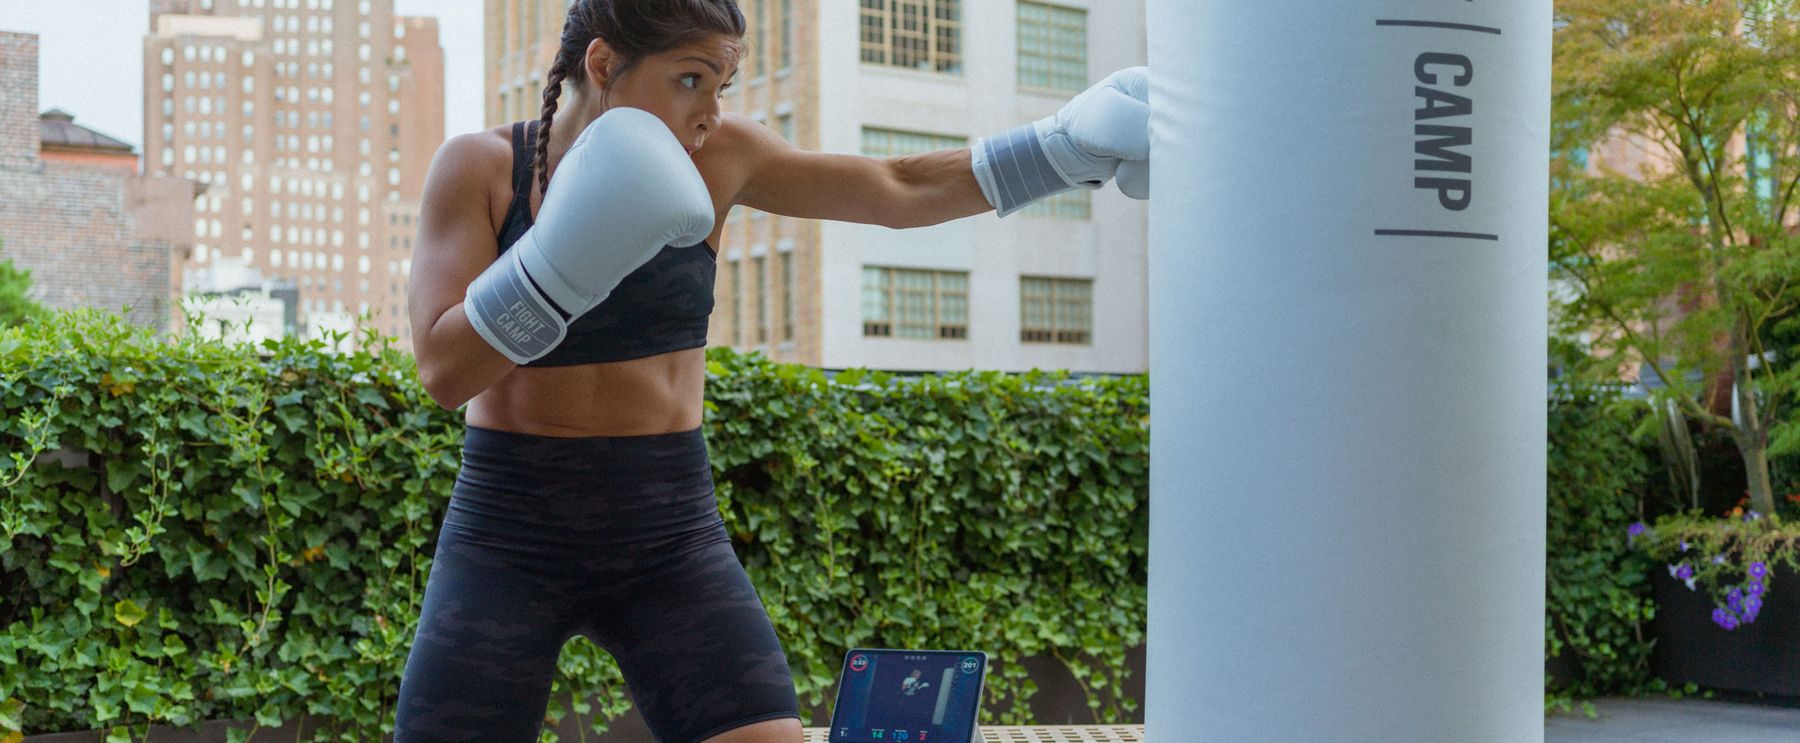 30-Minute At-Home Boxing Workout For Beginners